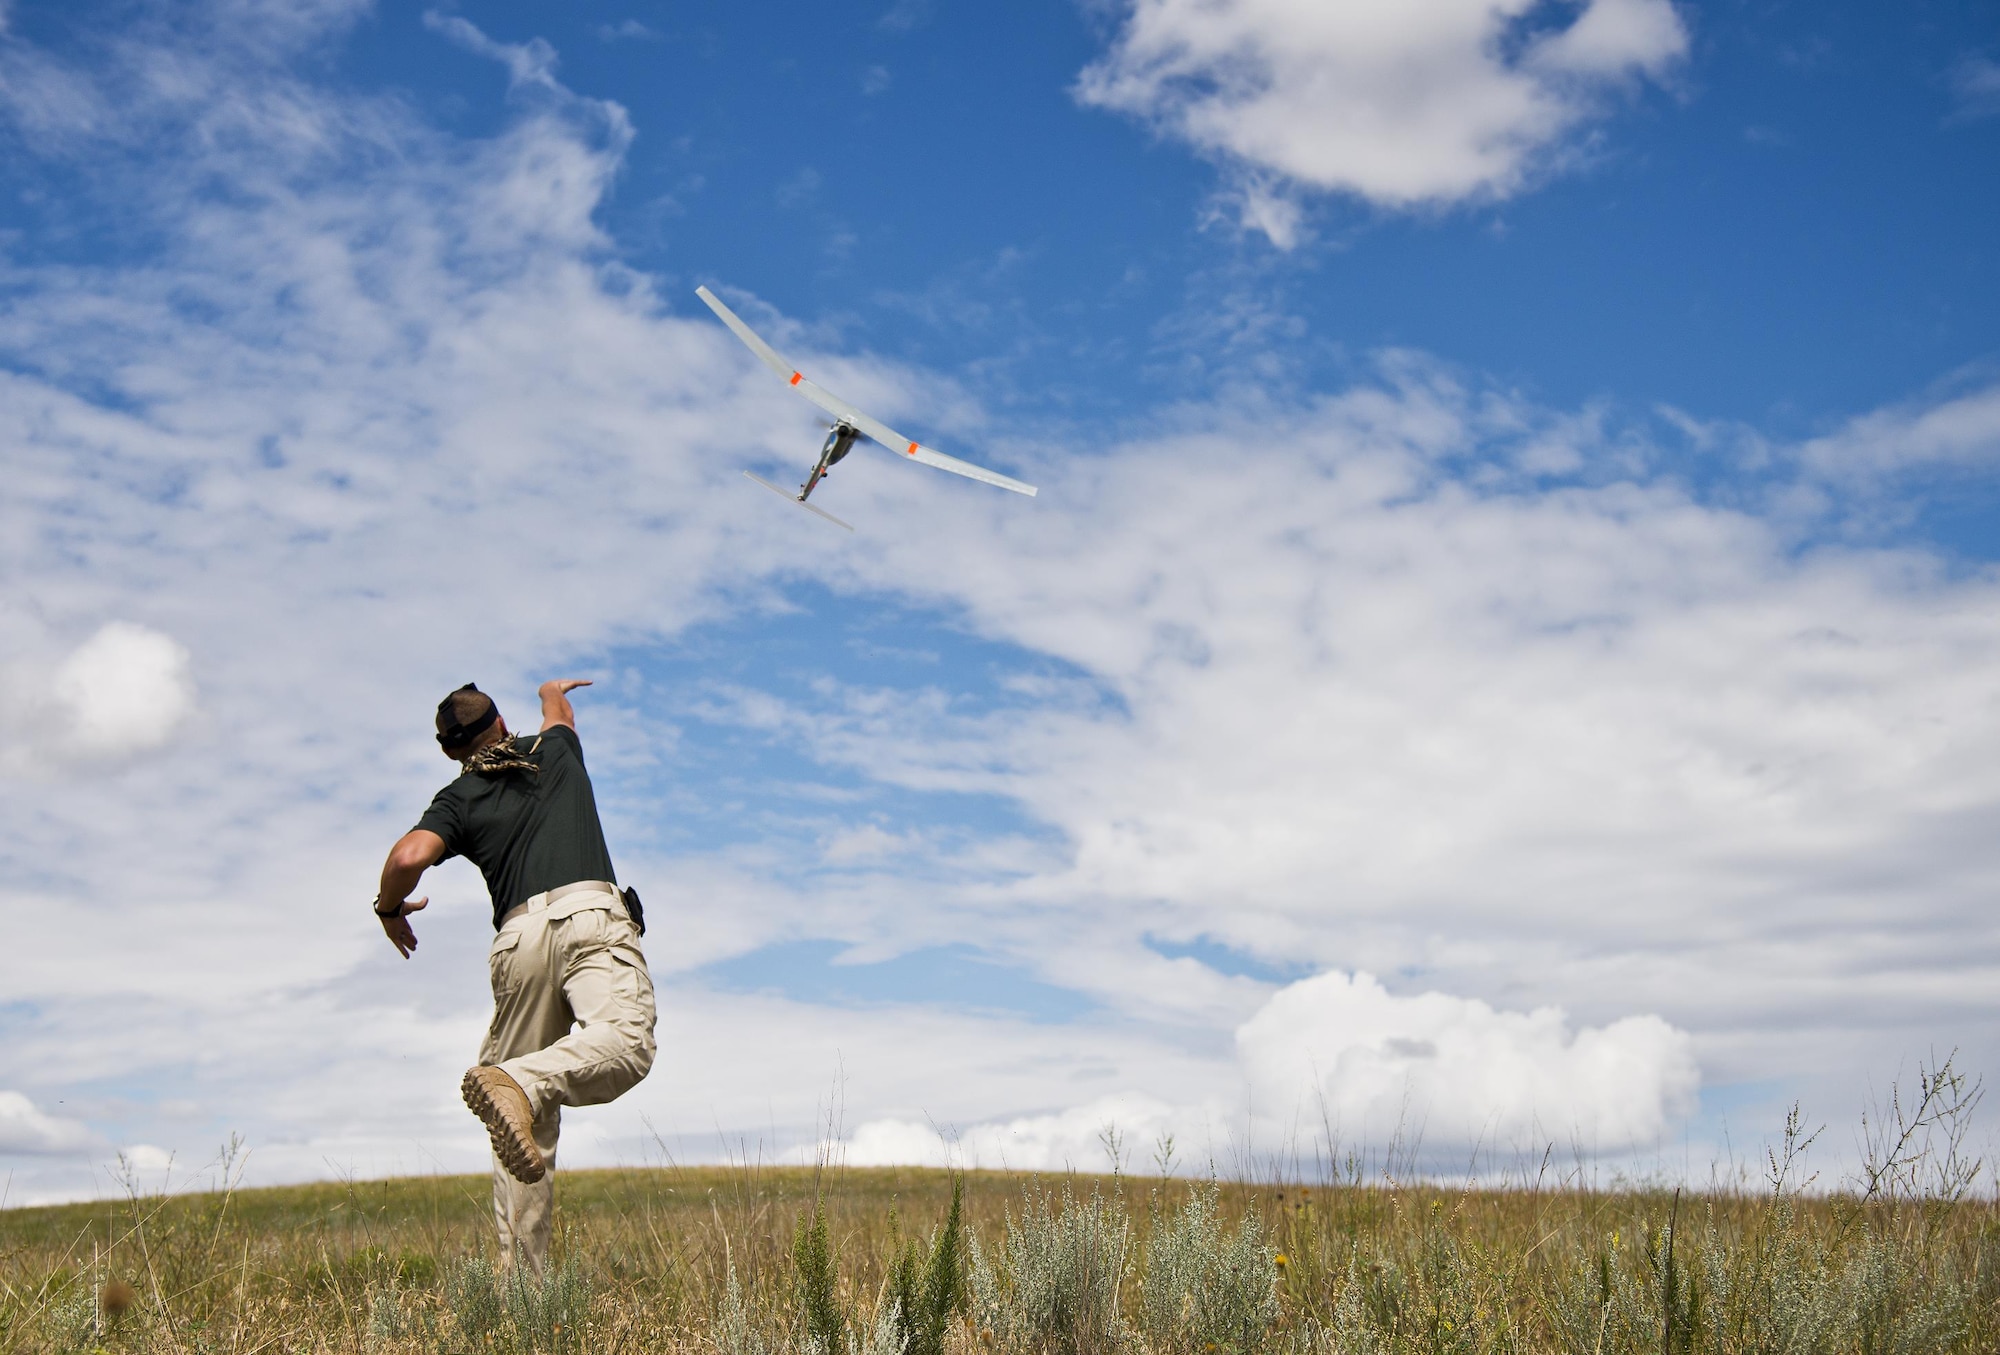 Staff Sgt. Leland Hastings, of the 919th Special Operations Security Forces Squadron, launches a Raven-B, a 4-by-4 foot unmanned aerial system, into the skies above Camp Guernsey, Wyo., Aug. 4, 2015. The 919th SOSFS brought the UAS to demonstrate its capabilities to other security forces units involved in a large field training exercise at the camp. The Raven-B has the ability to take photos, video in day or night, and even designate locations via an IR laser.  It also provides coordinates, magnetic azimuths, and linear distances creating a birds-eye view to topographical map. (U.S. Air Force photo/Tech. Sgt. Sam King)